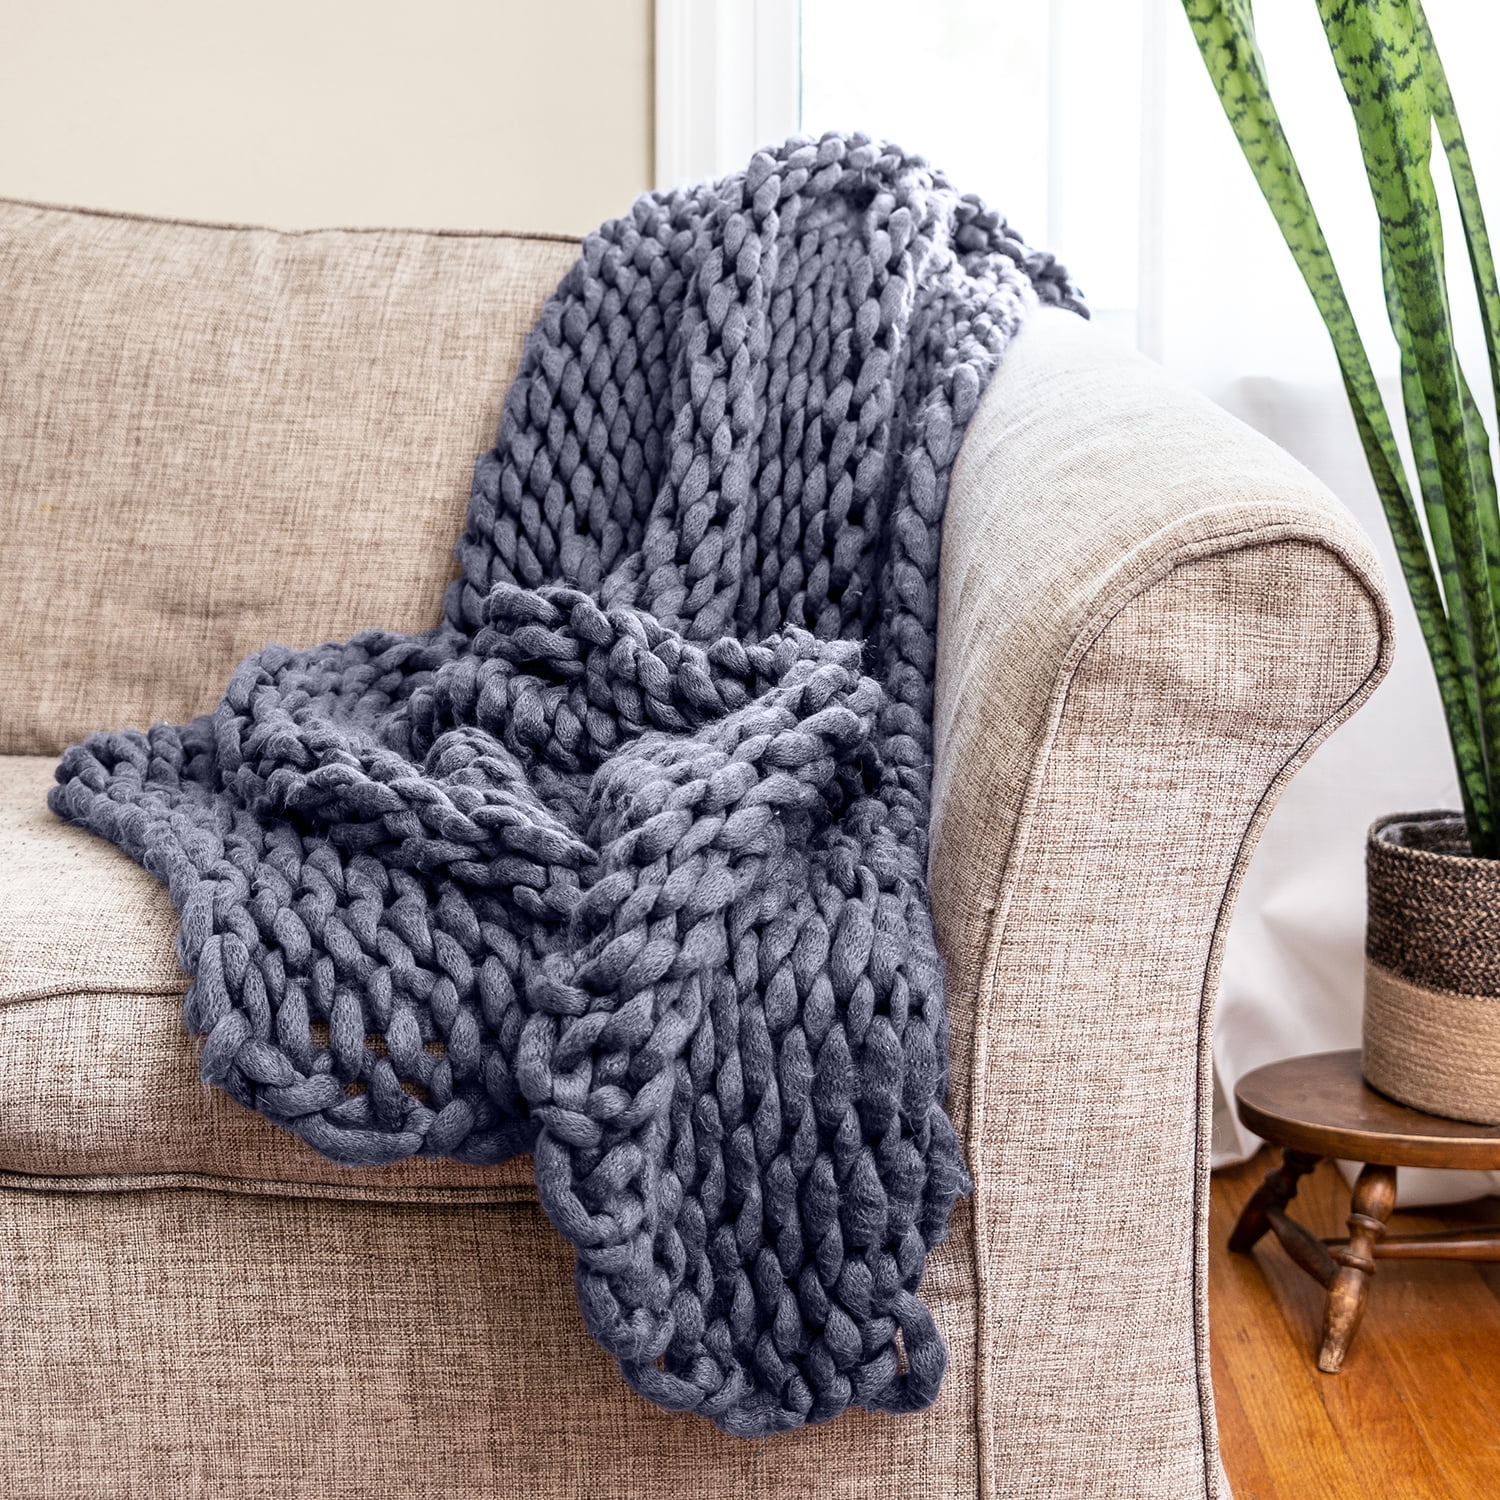 Picture of American Heritage Textiles 70005 40 x 50 in. Chunky Knit Throw, Indigo